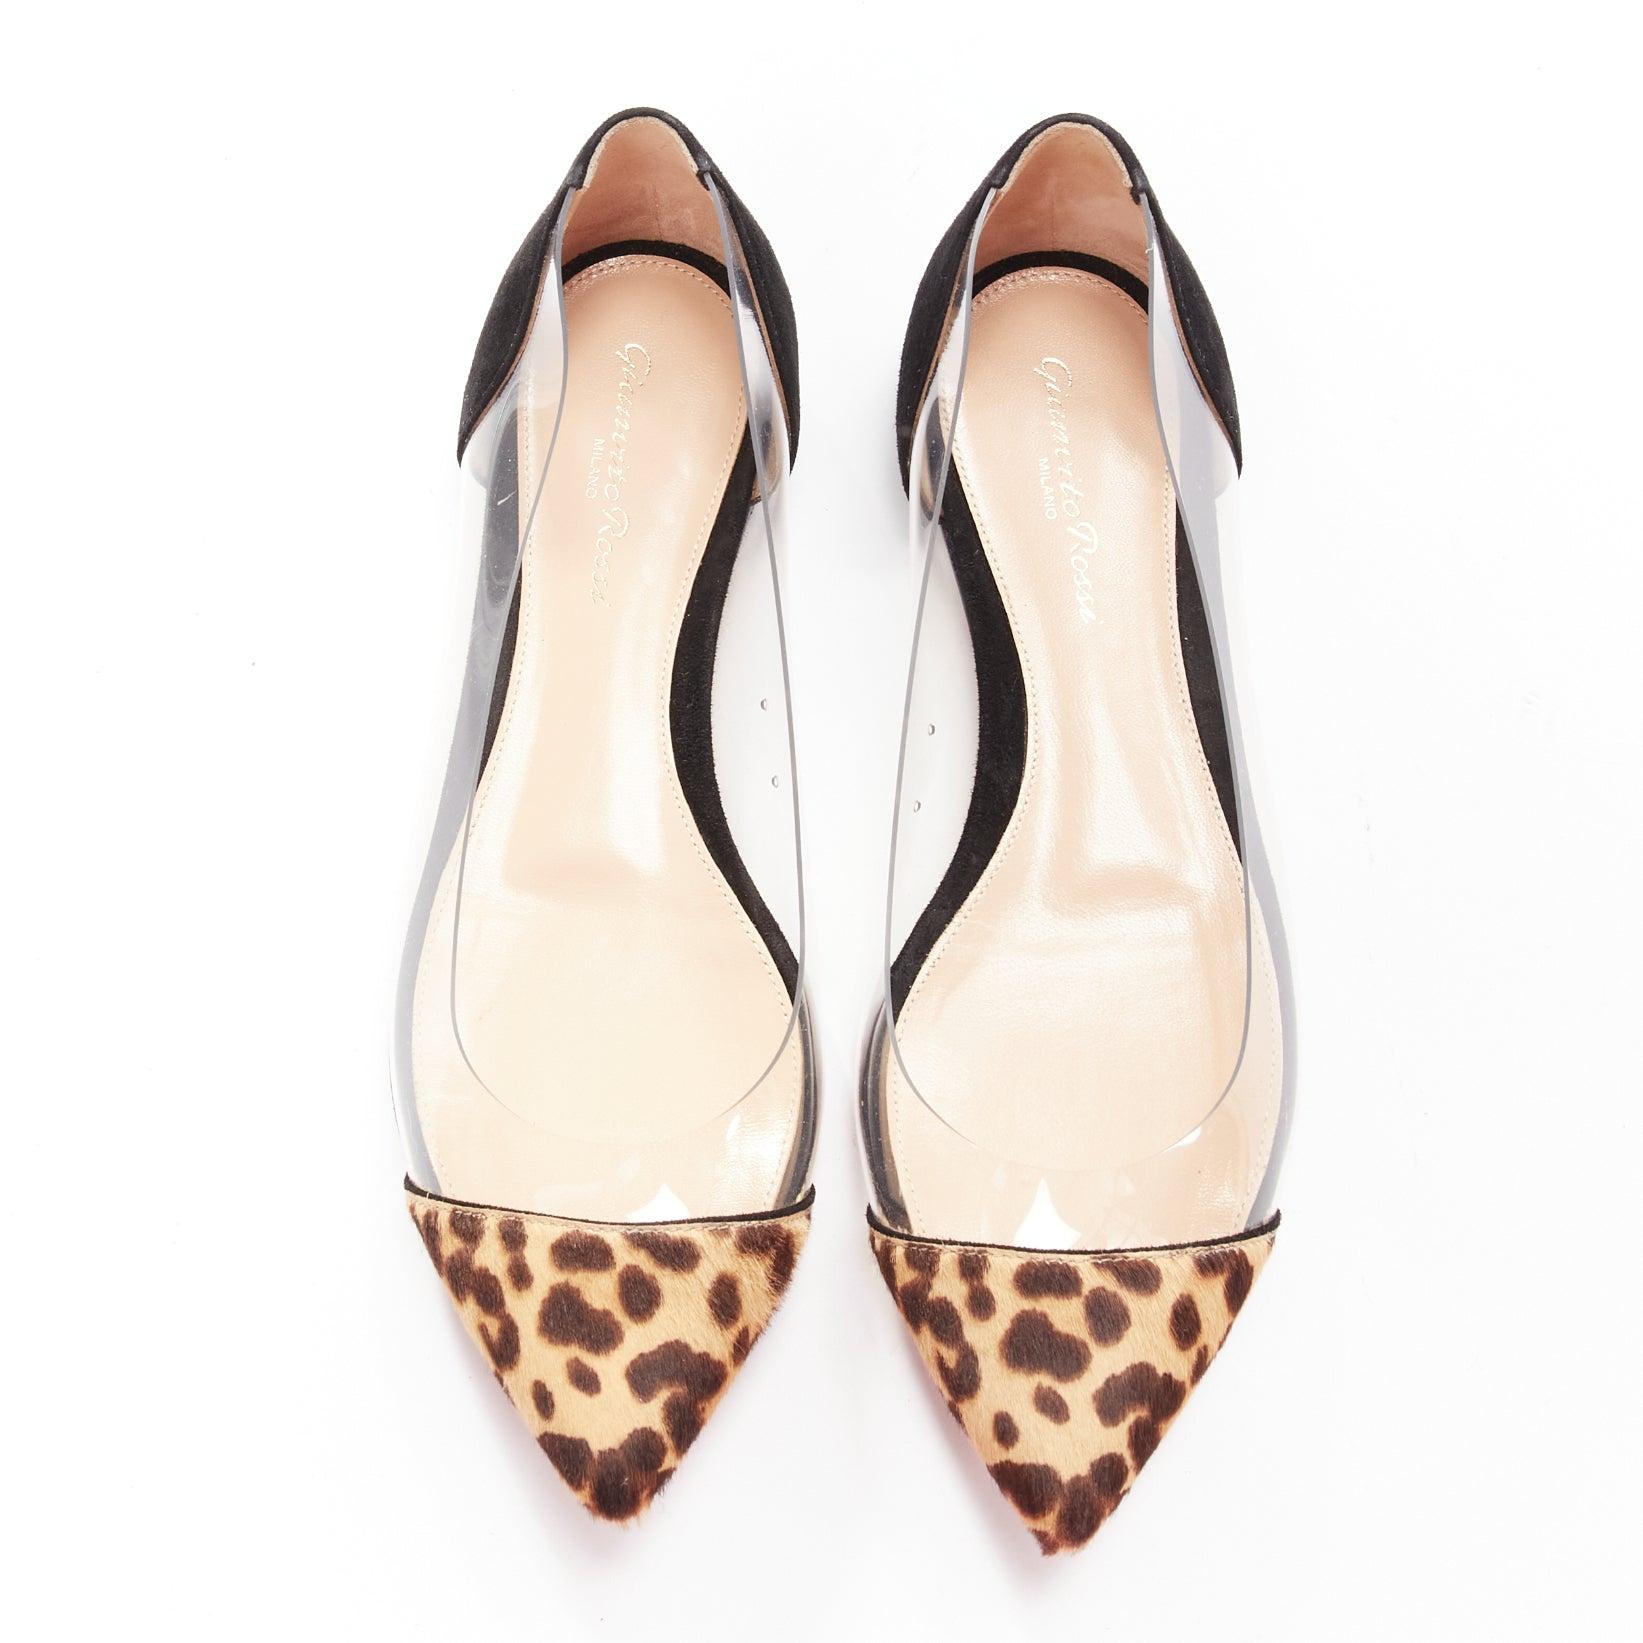 GIANVITO ROSSI Plexi Flat leoparrd point toe PVC suede flats EU37.5
Reference: SNKO/A00378
Brand: Gianvito Rossi
Model: Plexi Flat
Material: PVC, Leather
Color: Brown, Black
Pattern: Leopard
Lining: Beige Leather
Extra Details: PVC with leopard